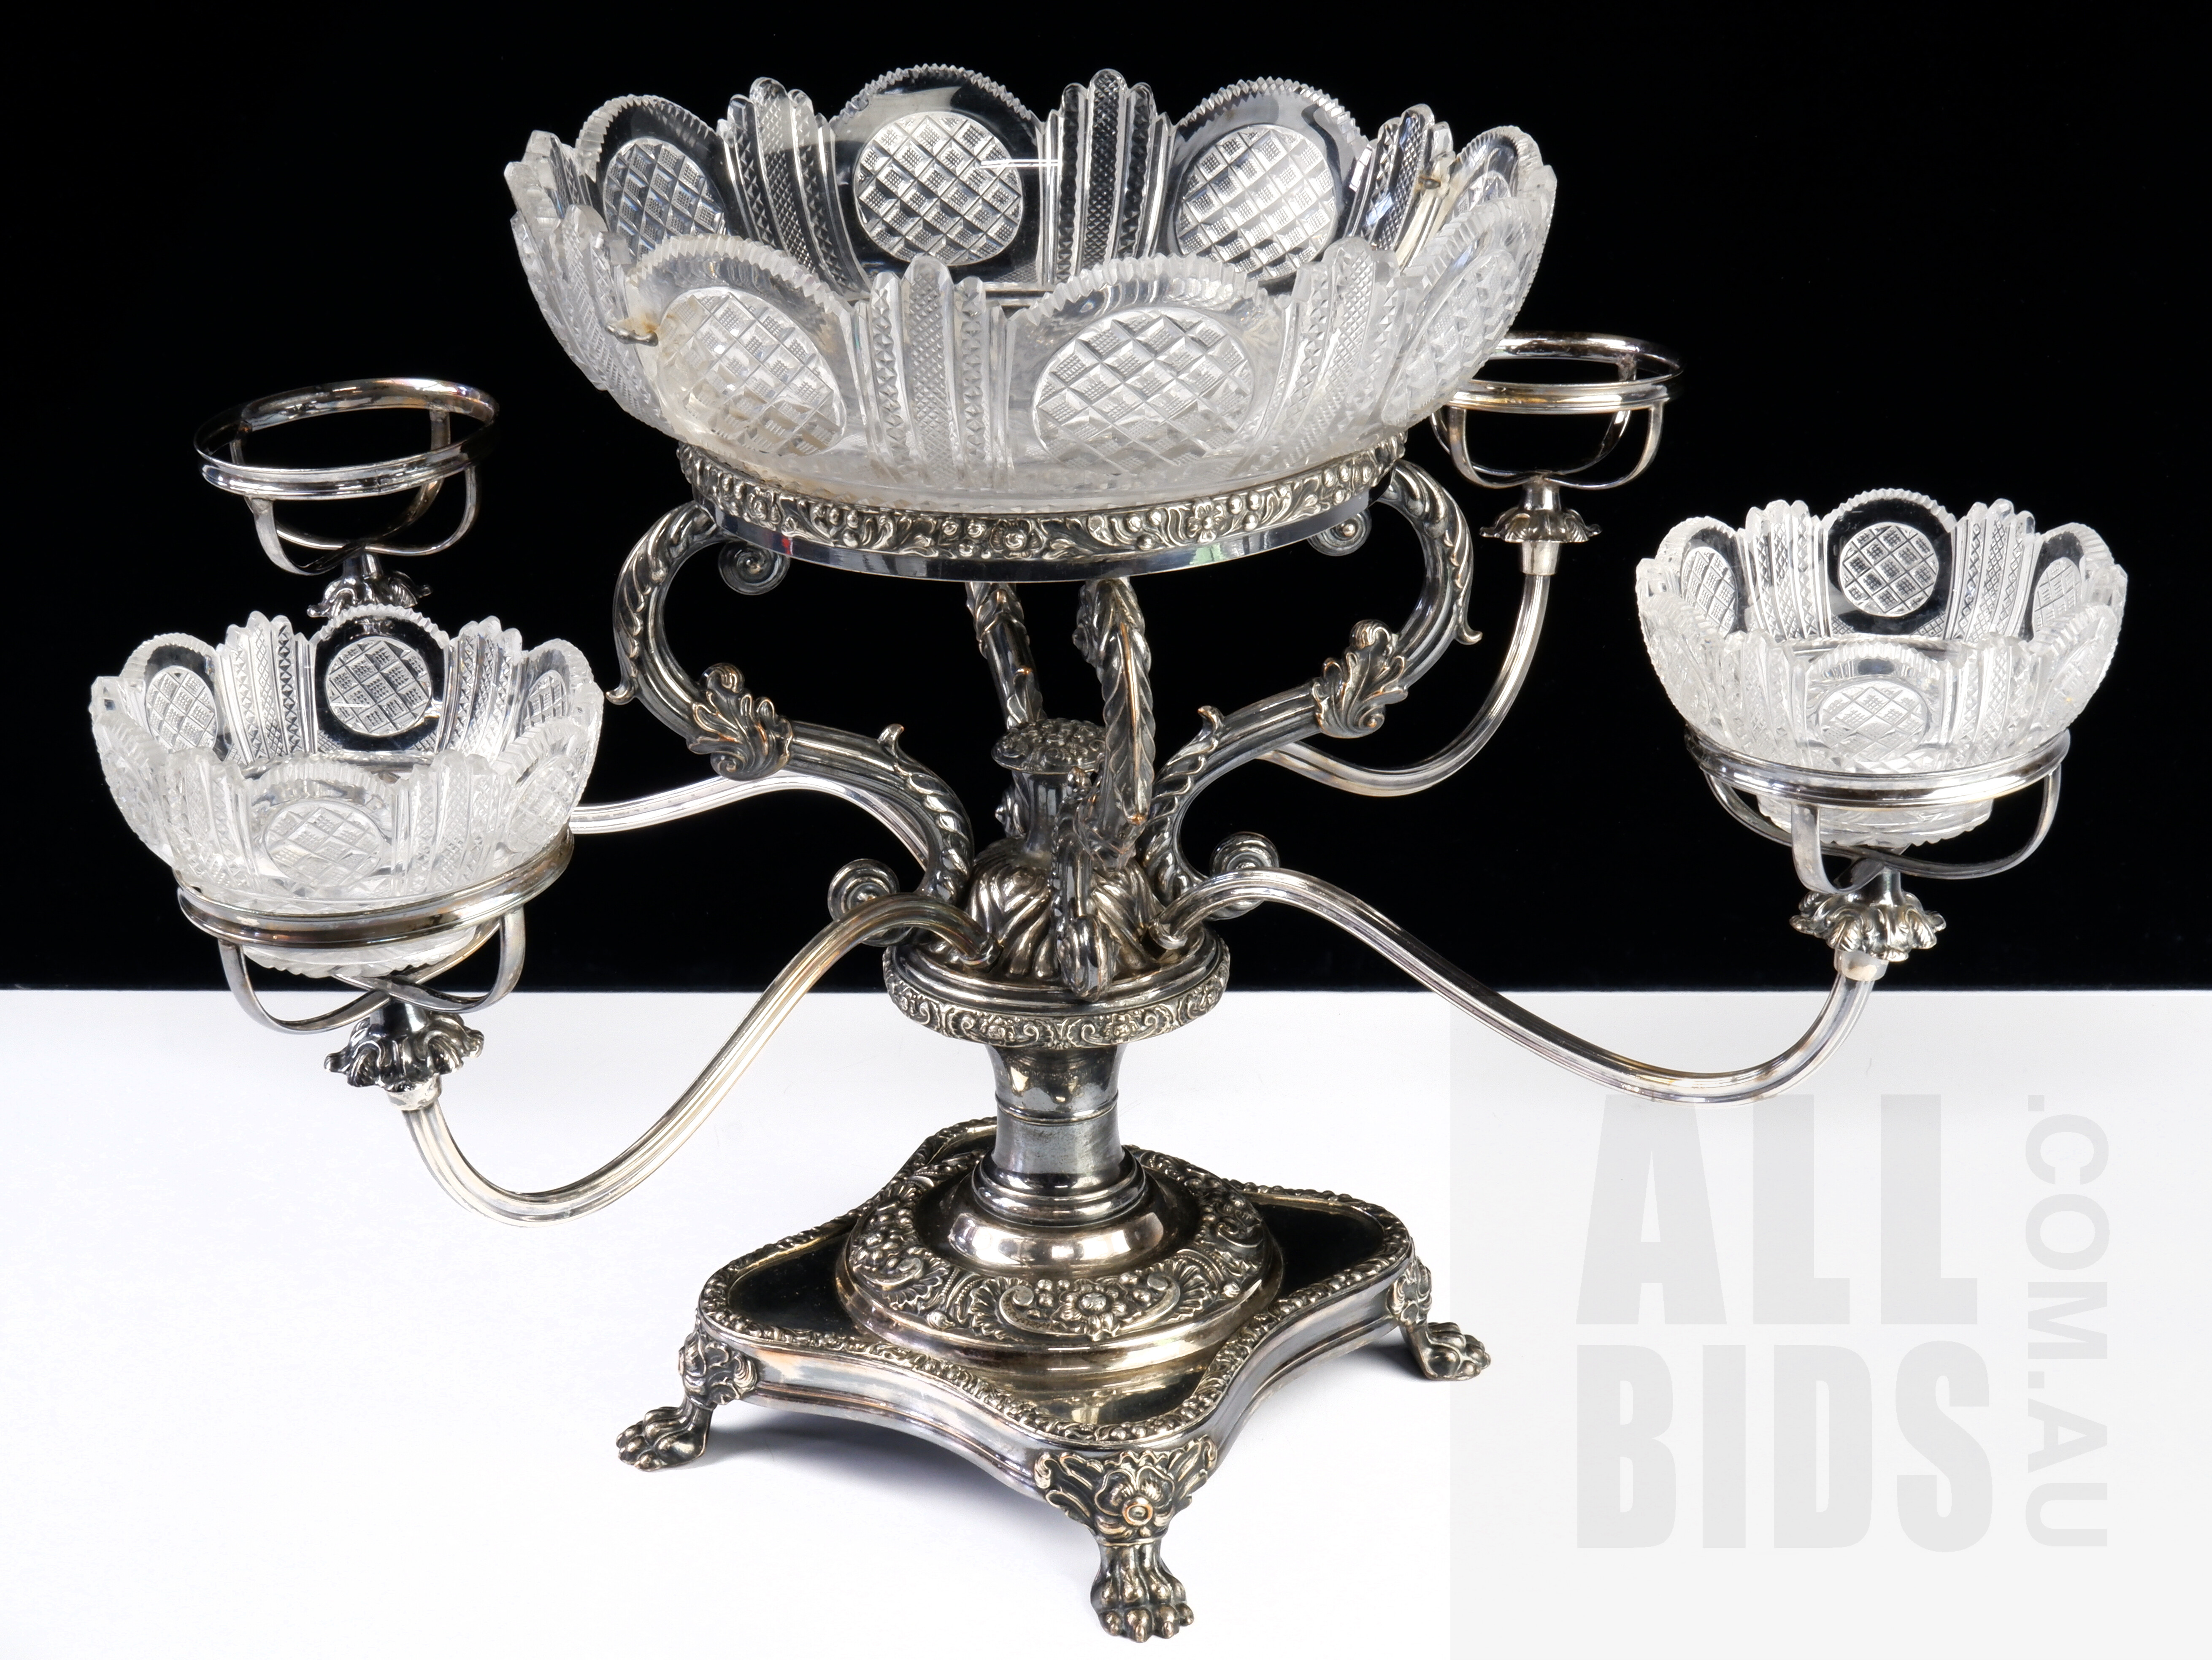 'Antique Sheffield Plate Epergne with Antique Staple Repairs to Central Lead Crystal Bowl'